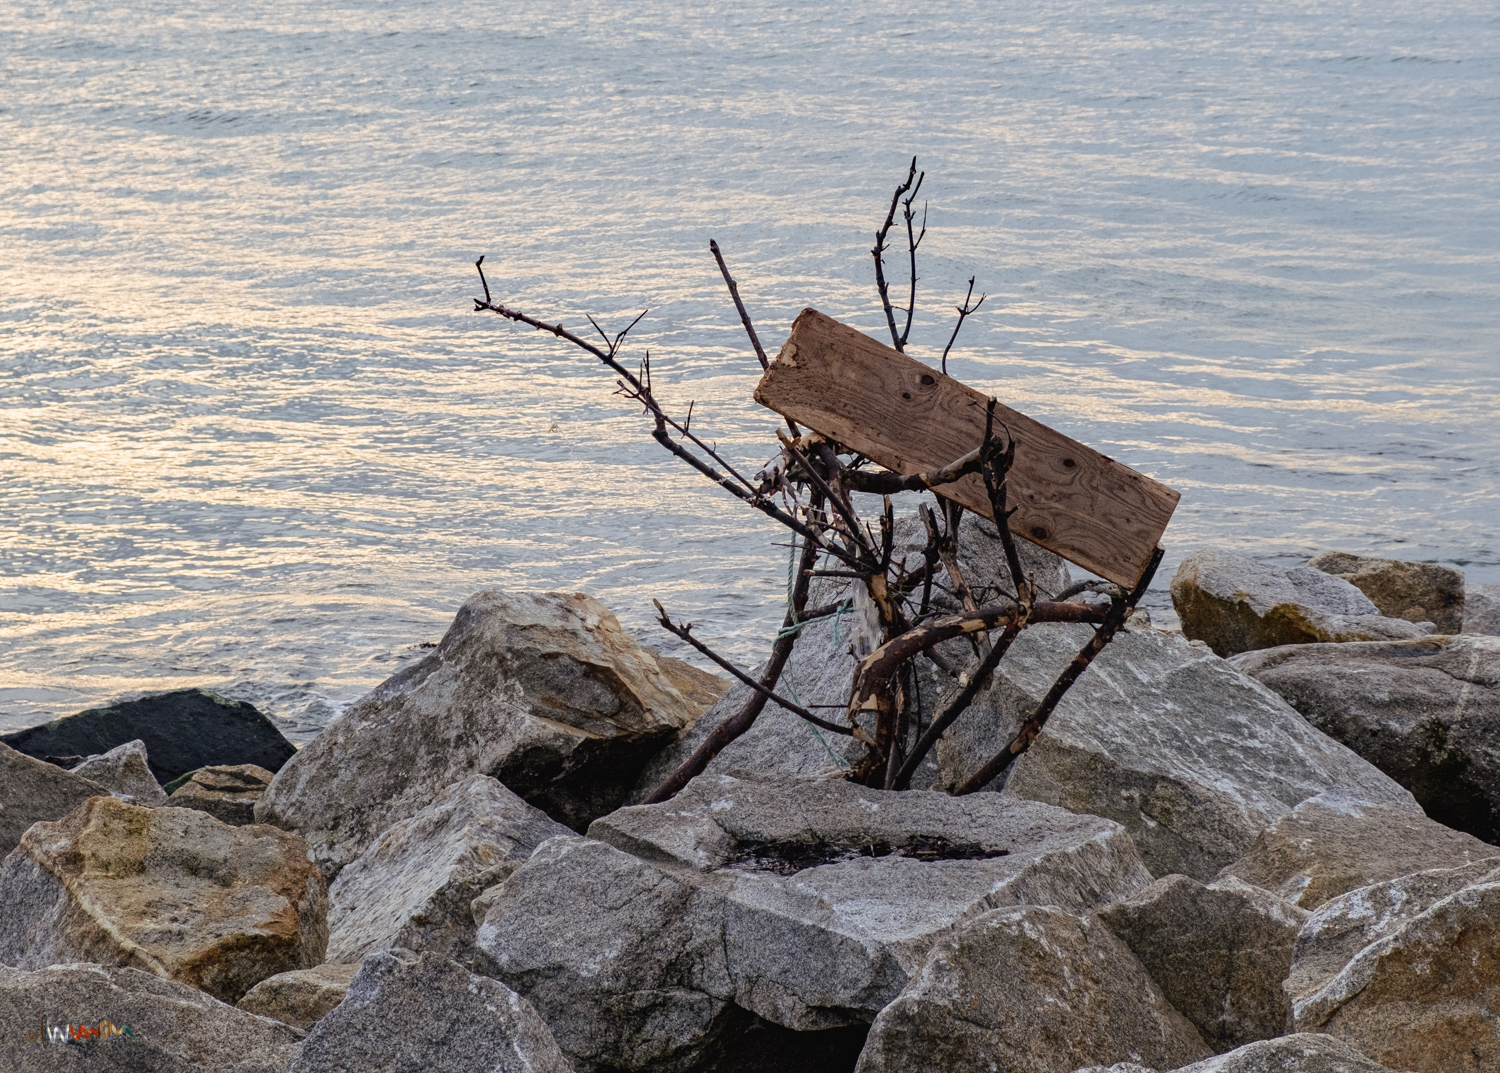 Pier driftwood, artist unknown, Dún Laoghaire from 2020. The pier flotsam sculpture appeared one winter morning. It was there for months, despite the apparent fragility. Who knows why? And why not?